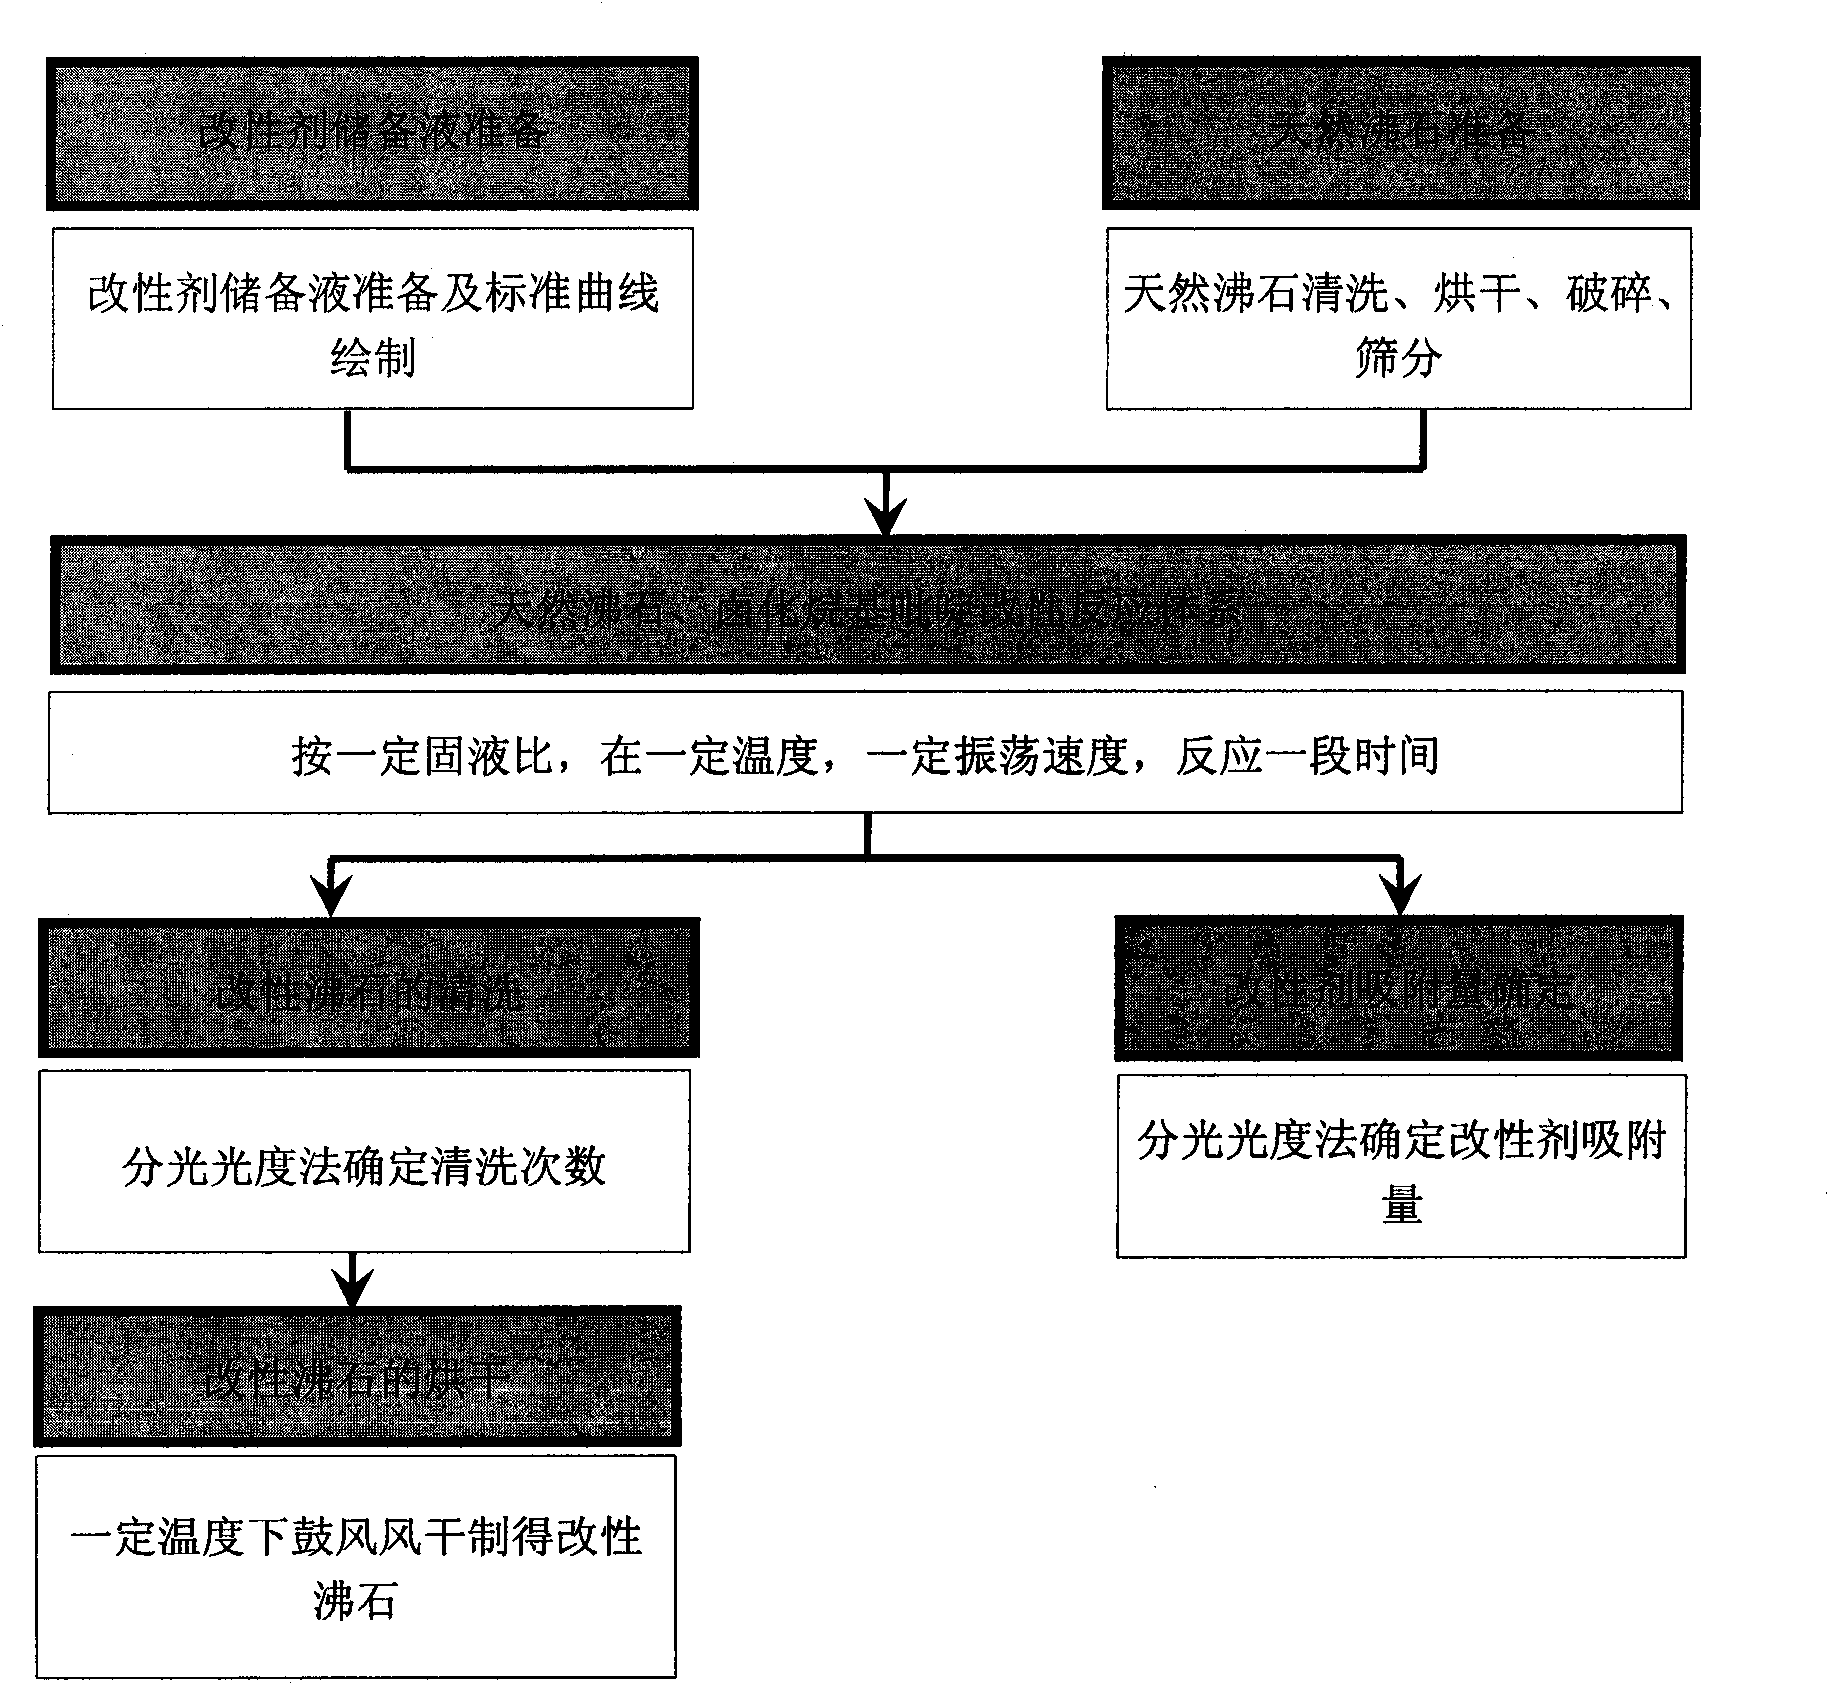 Preparation method and application for modified zeolite adsorbent